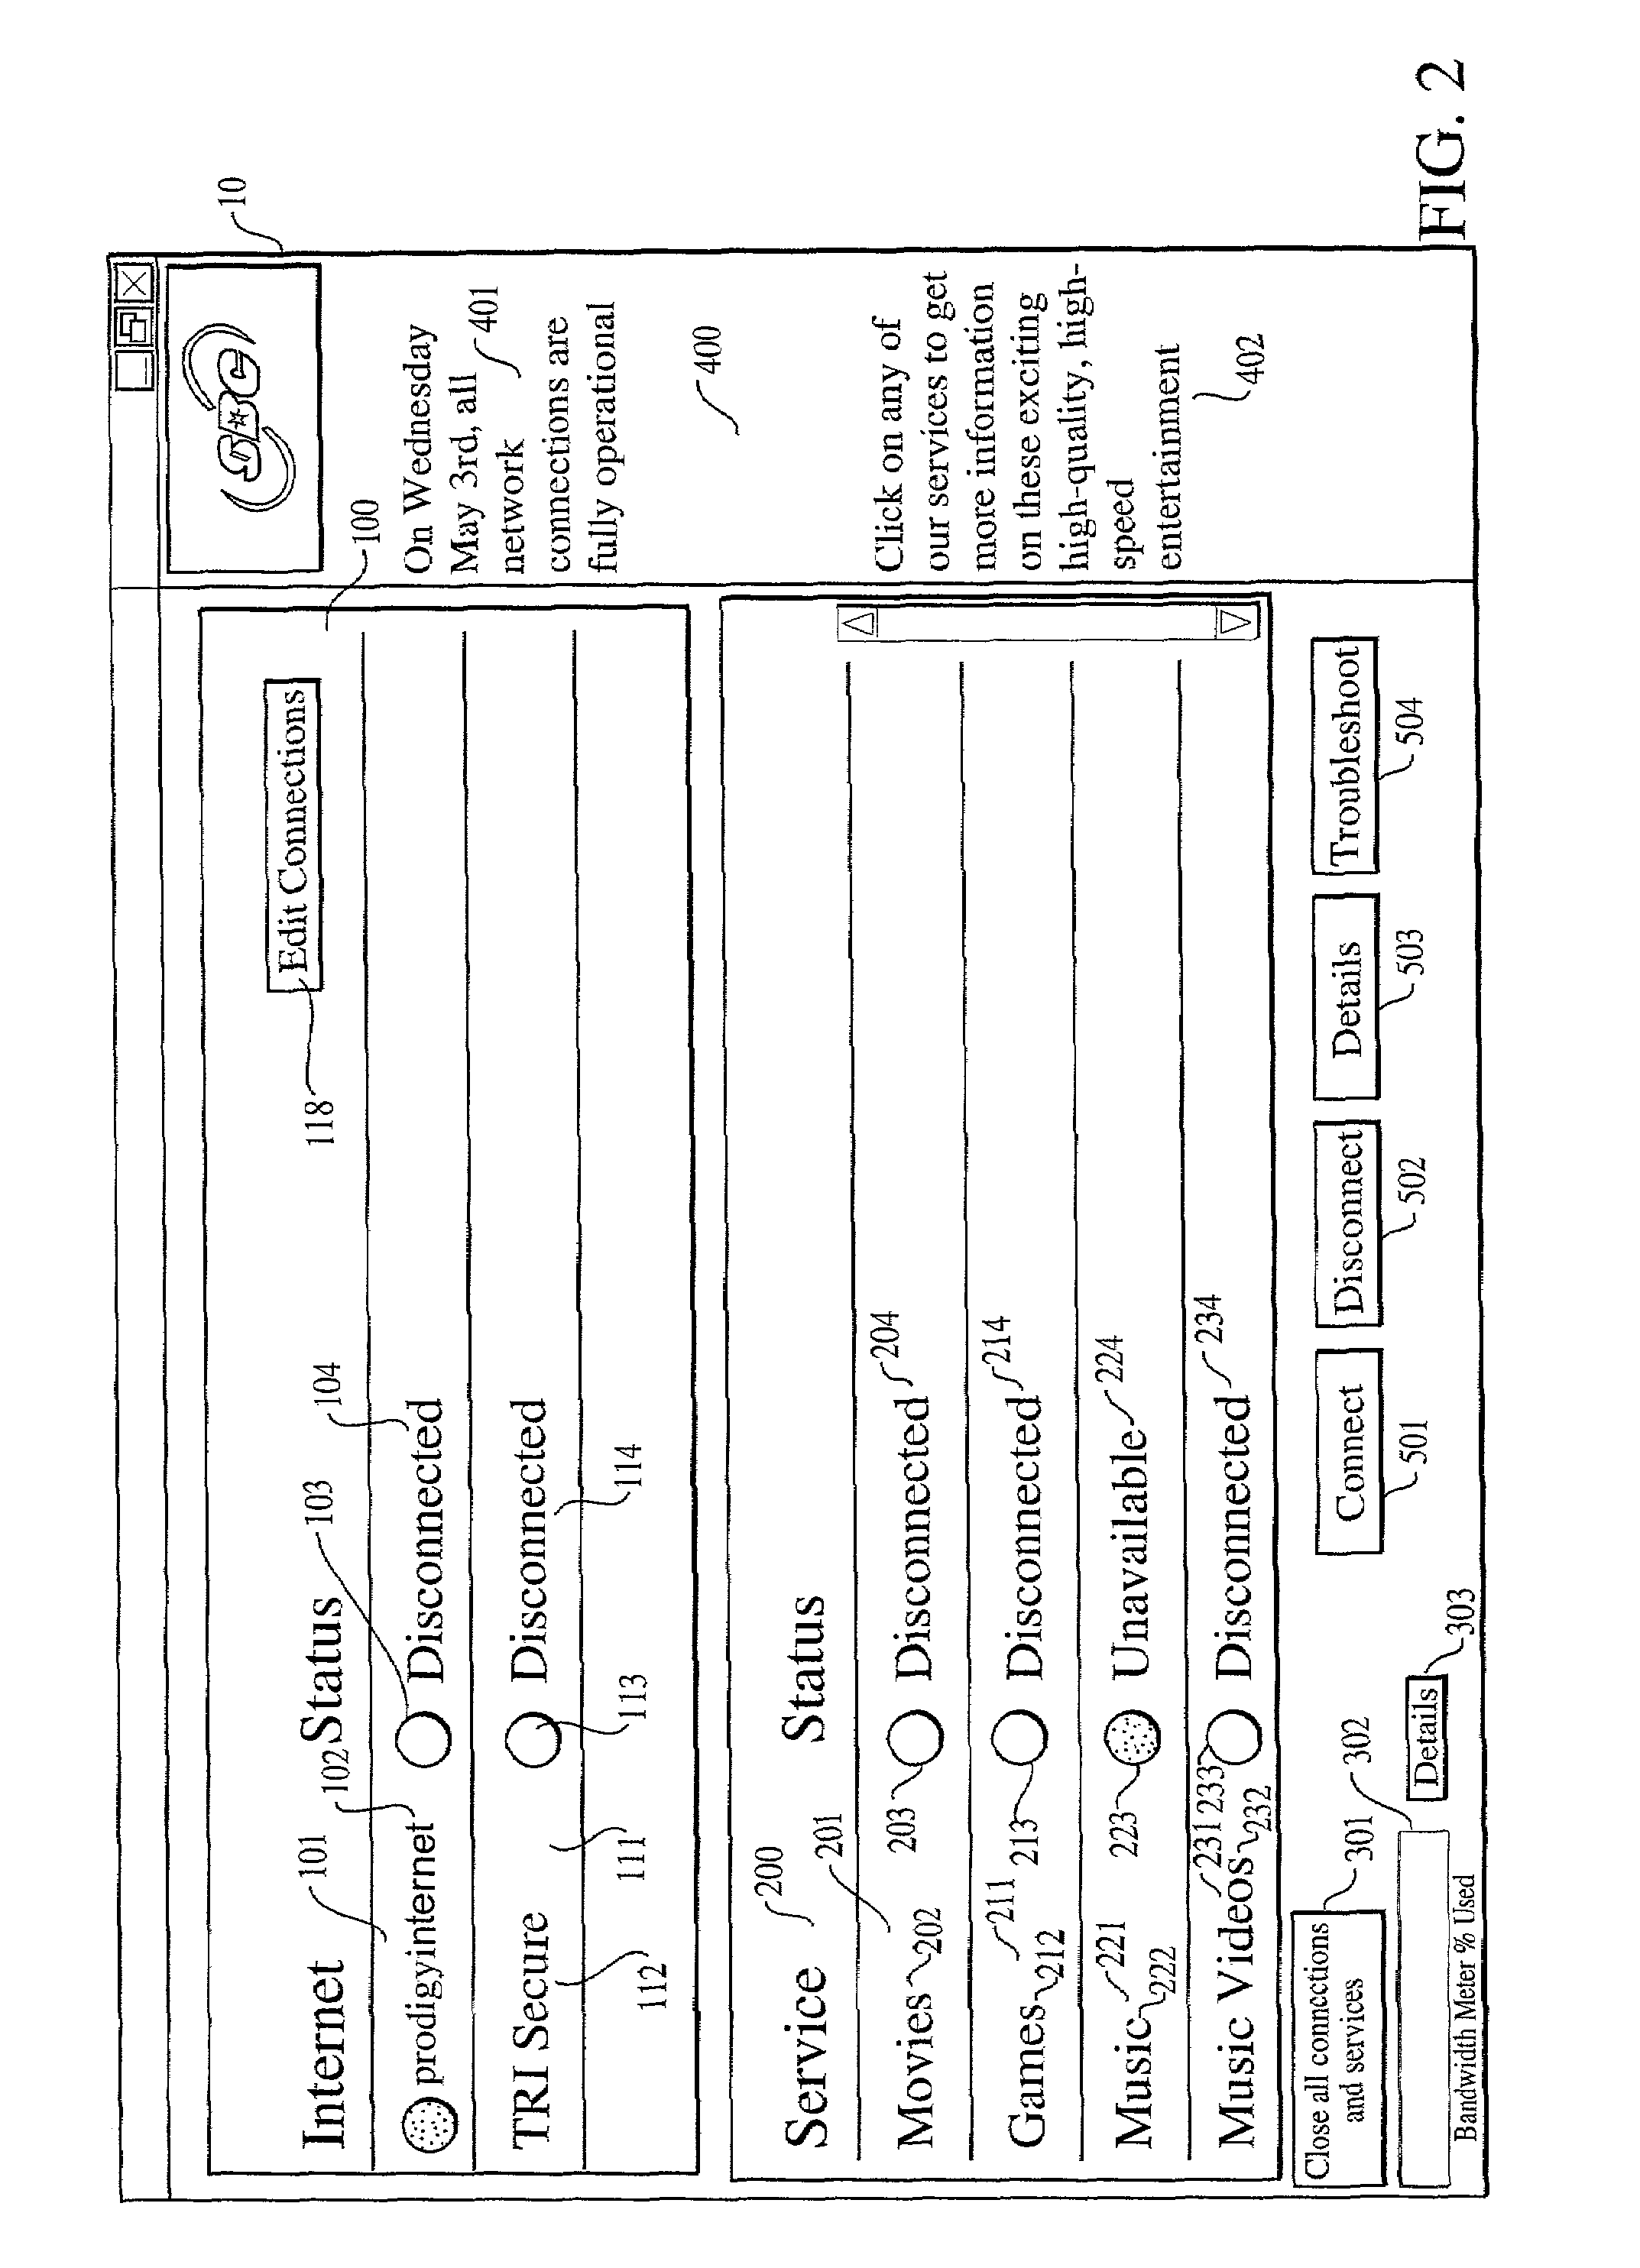 Unified interface for managing DSL services